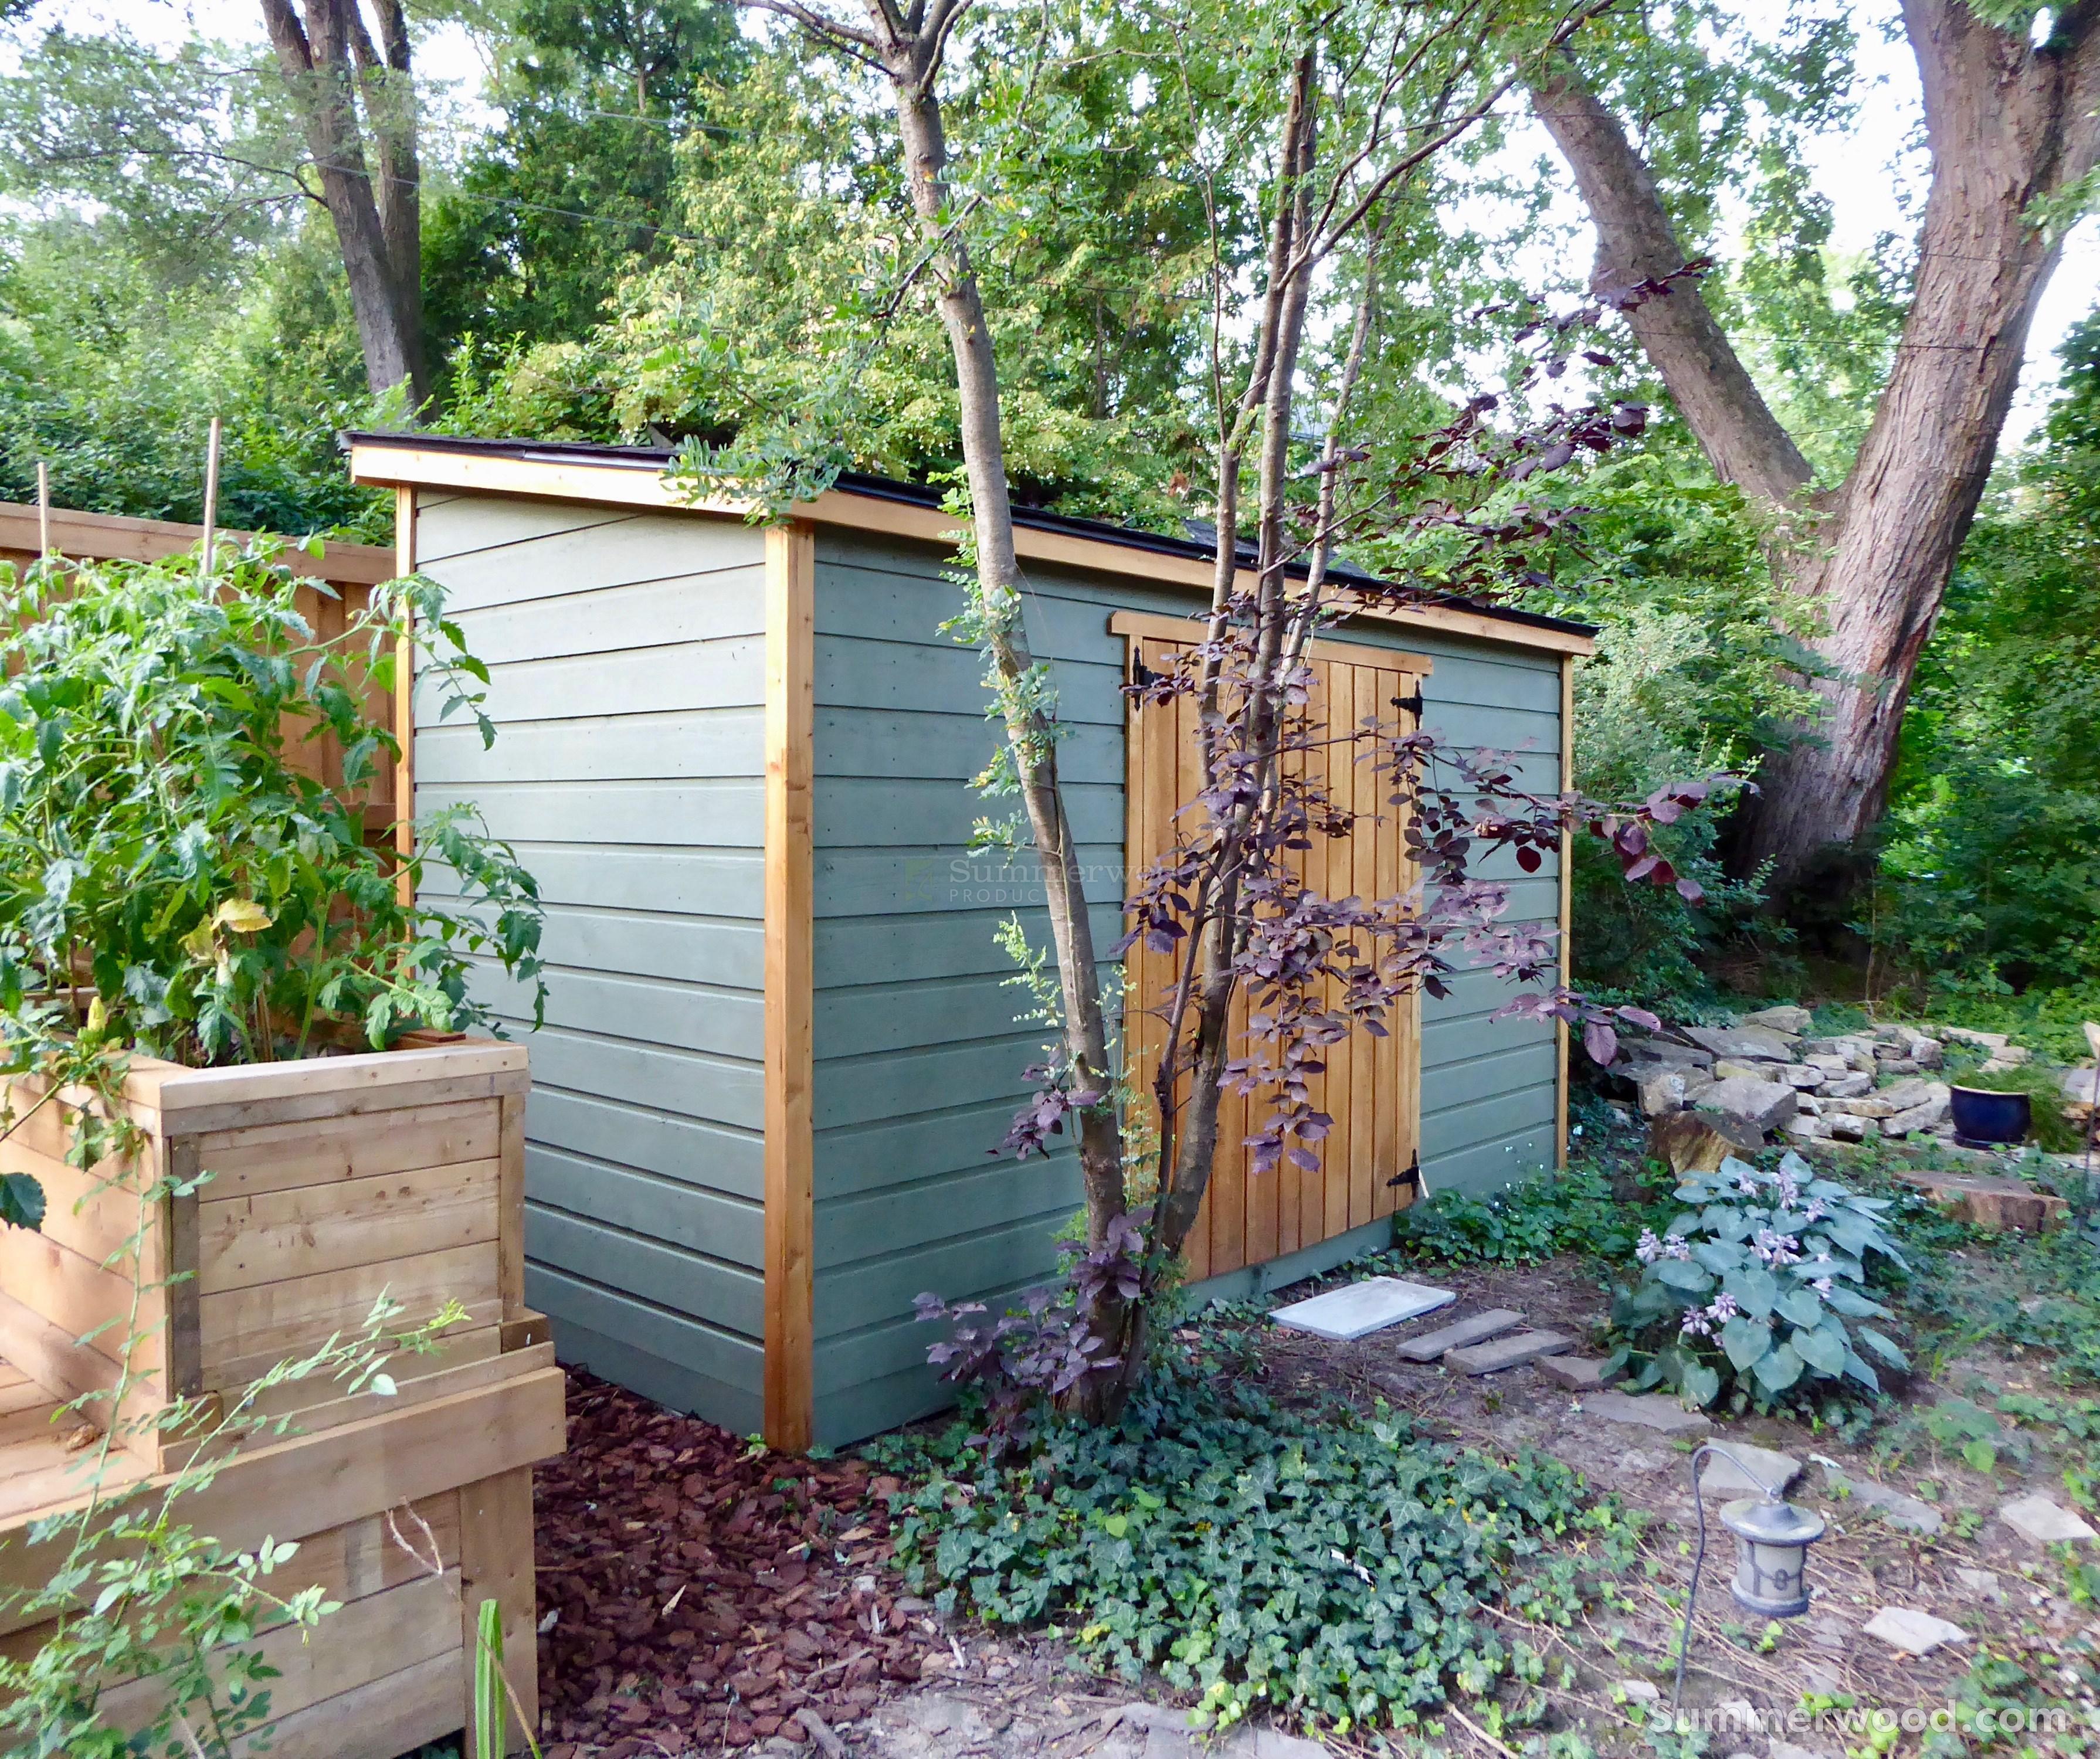 Cedar Sarawak outdoor shed 6 x 13 with double doors in Toronto, ON. ID number 217687-1